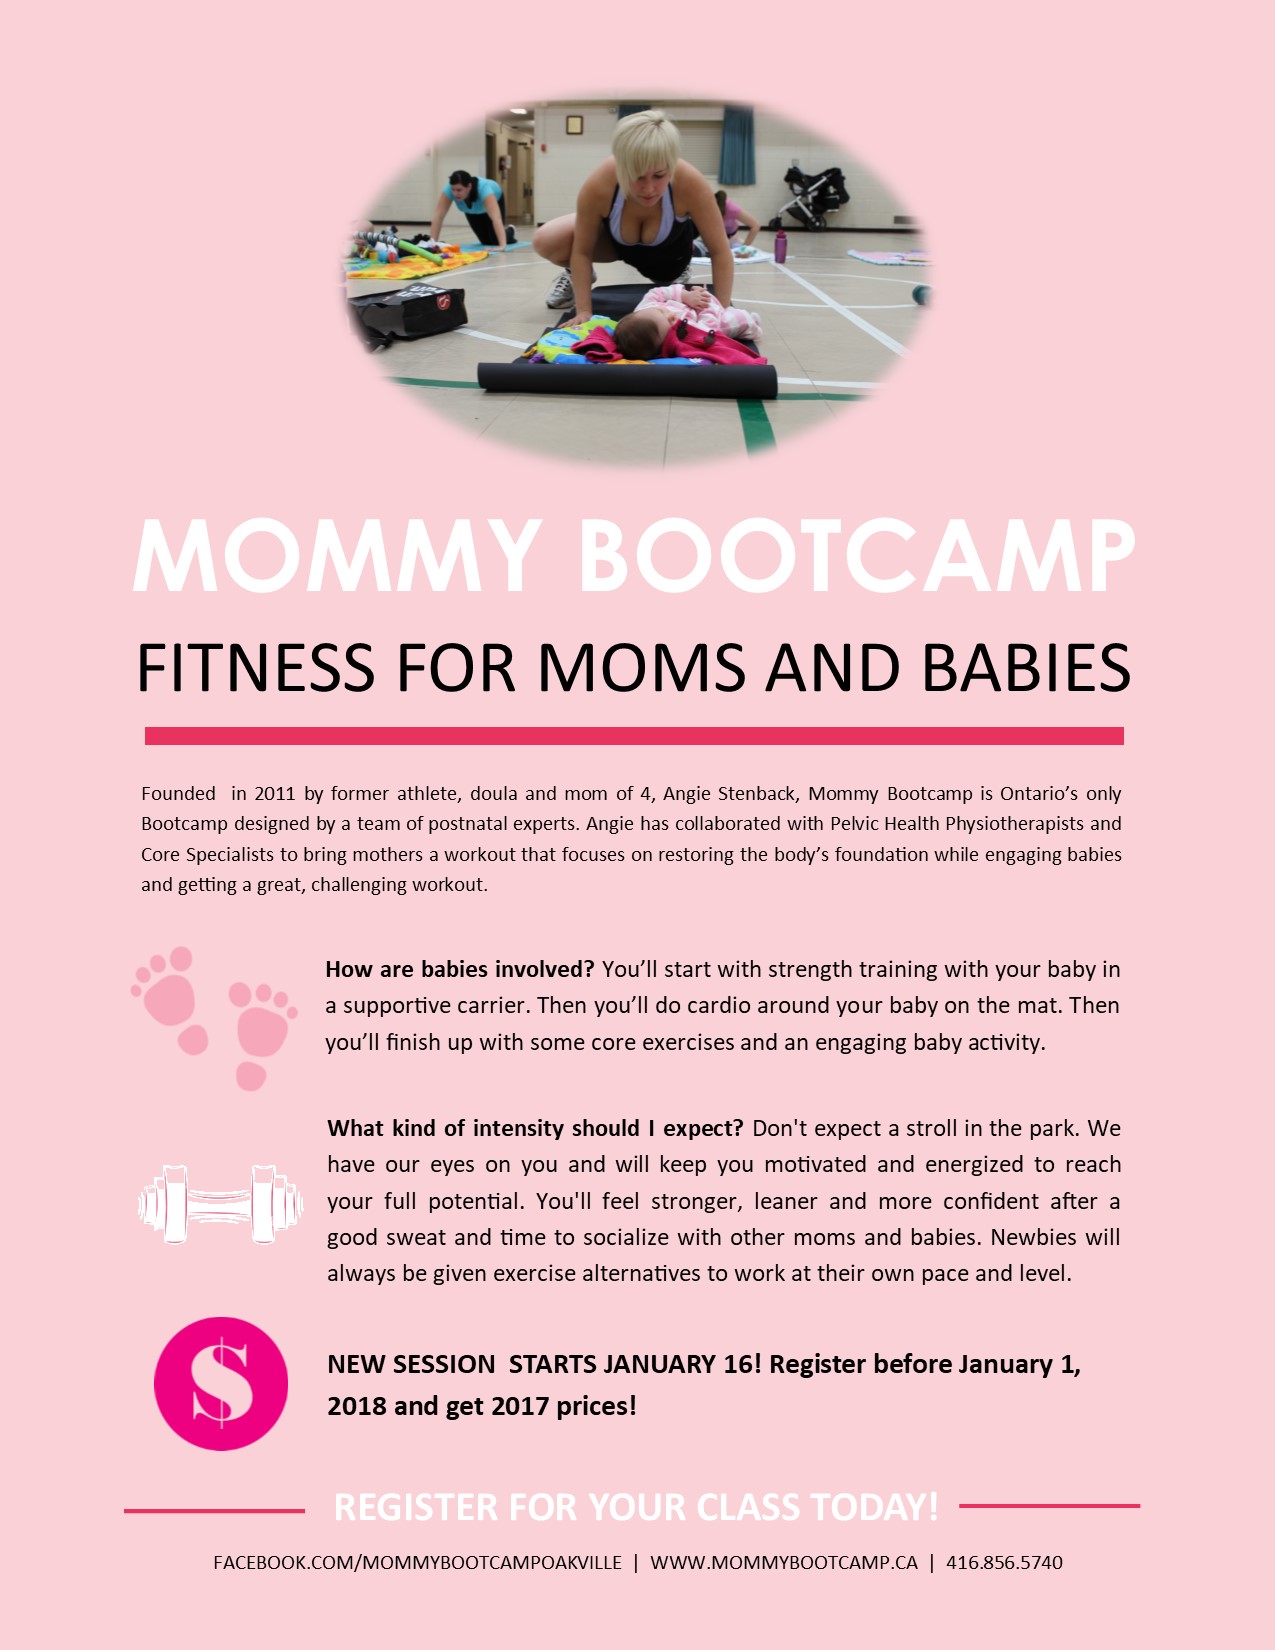 Mommy Bootcamp